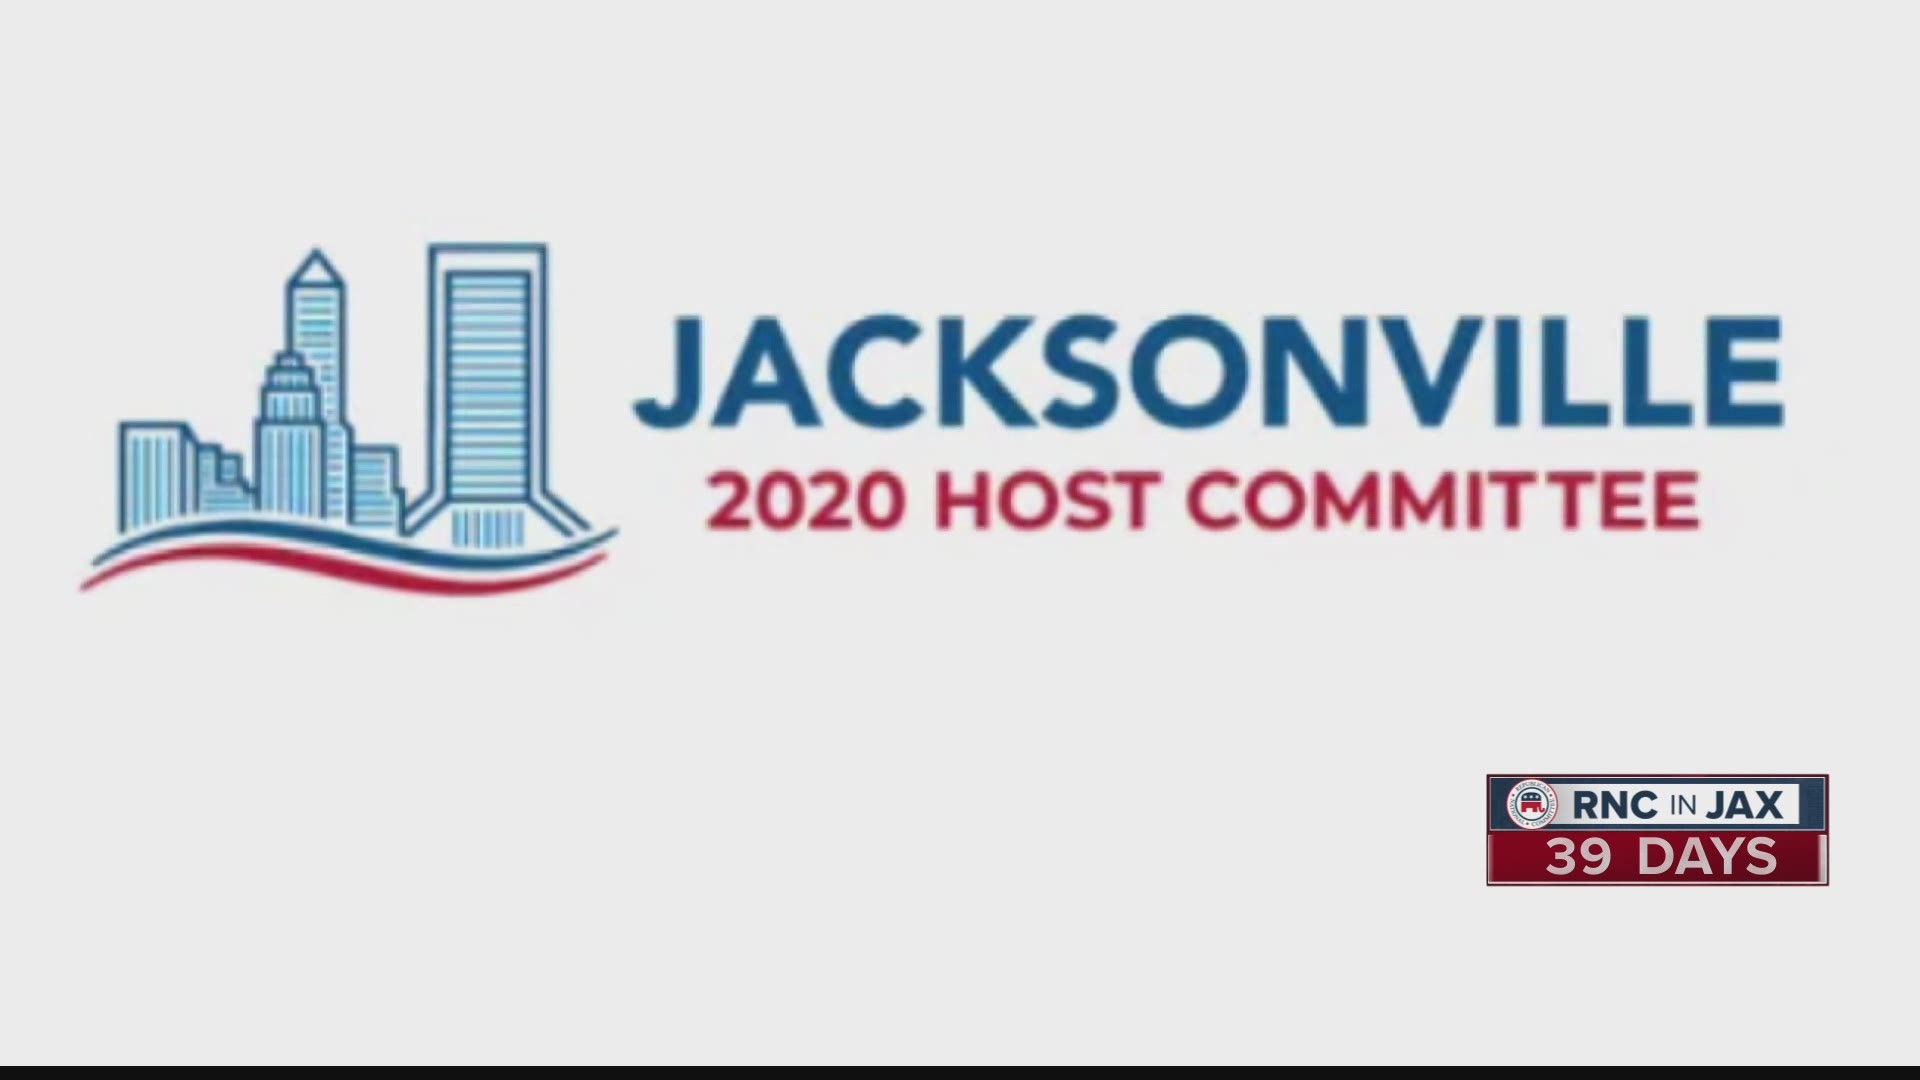 A memo released Thursday by the 2020 Jacksonville Host Committee says the first three days of the Republican National Convention in Jacksonville will be limited.